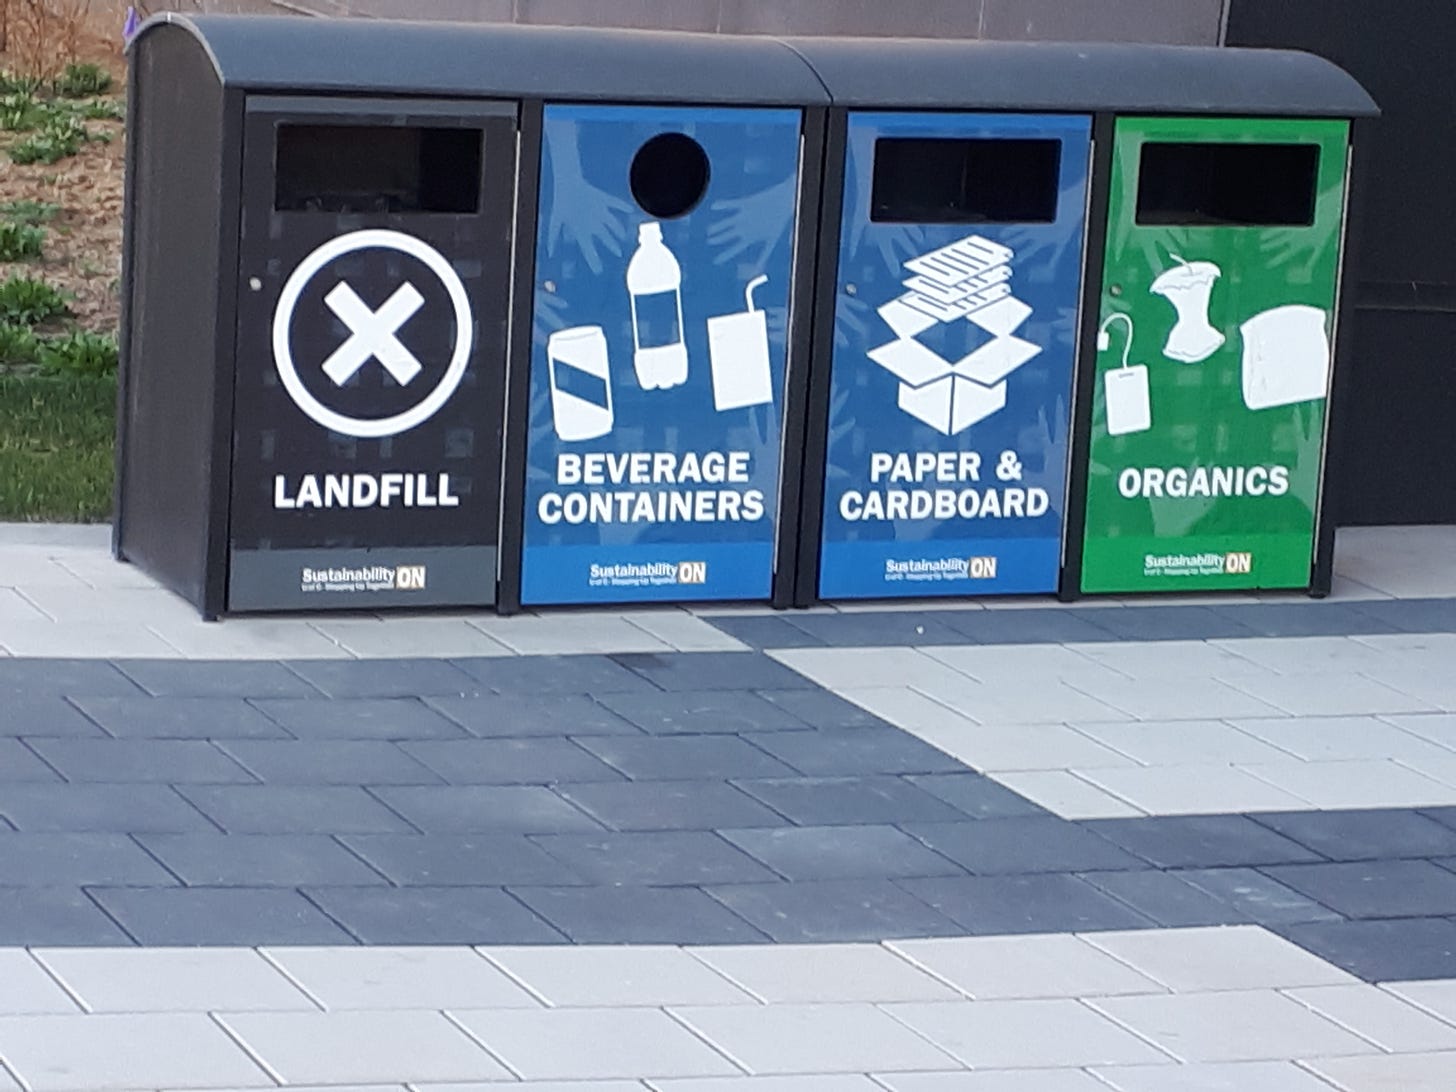 Waste receptacles with labels: landfill, beverage containers; paper; organics